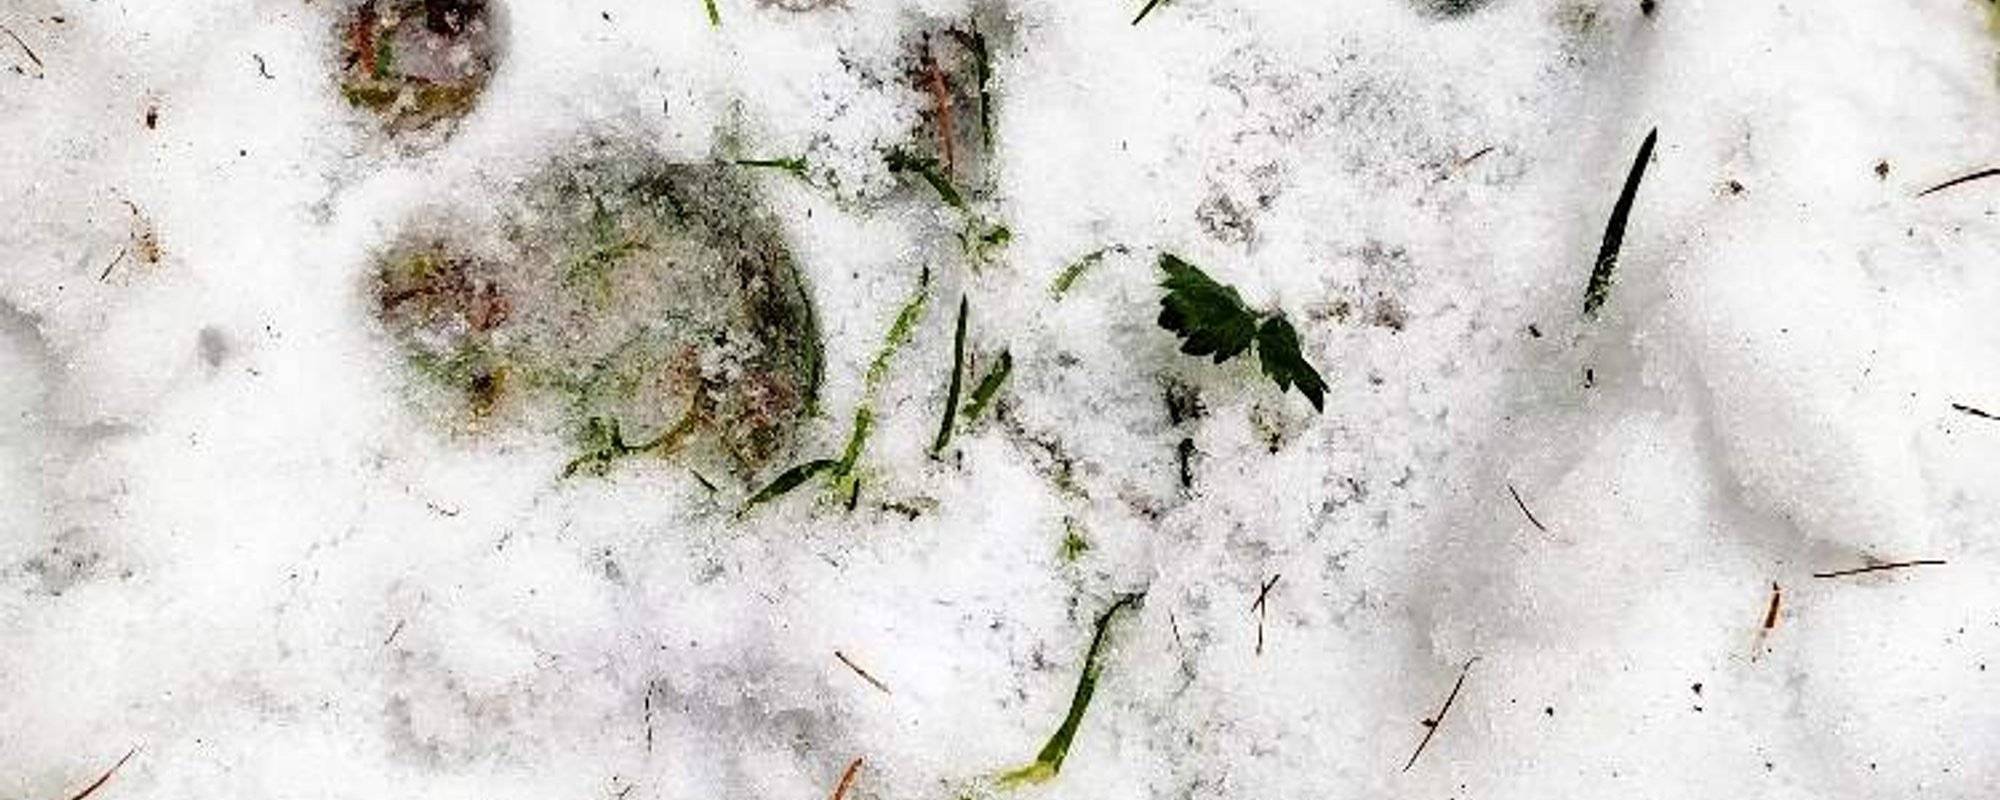 Traces of a Lynx in snow